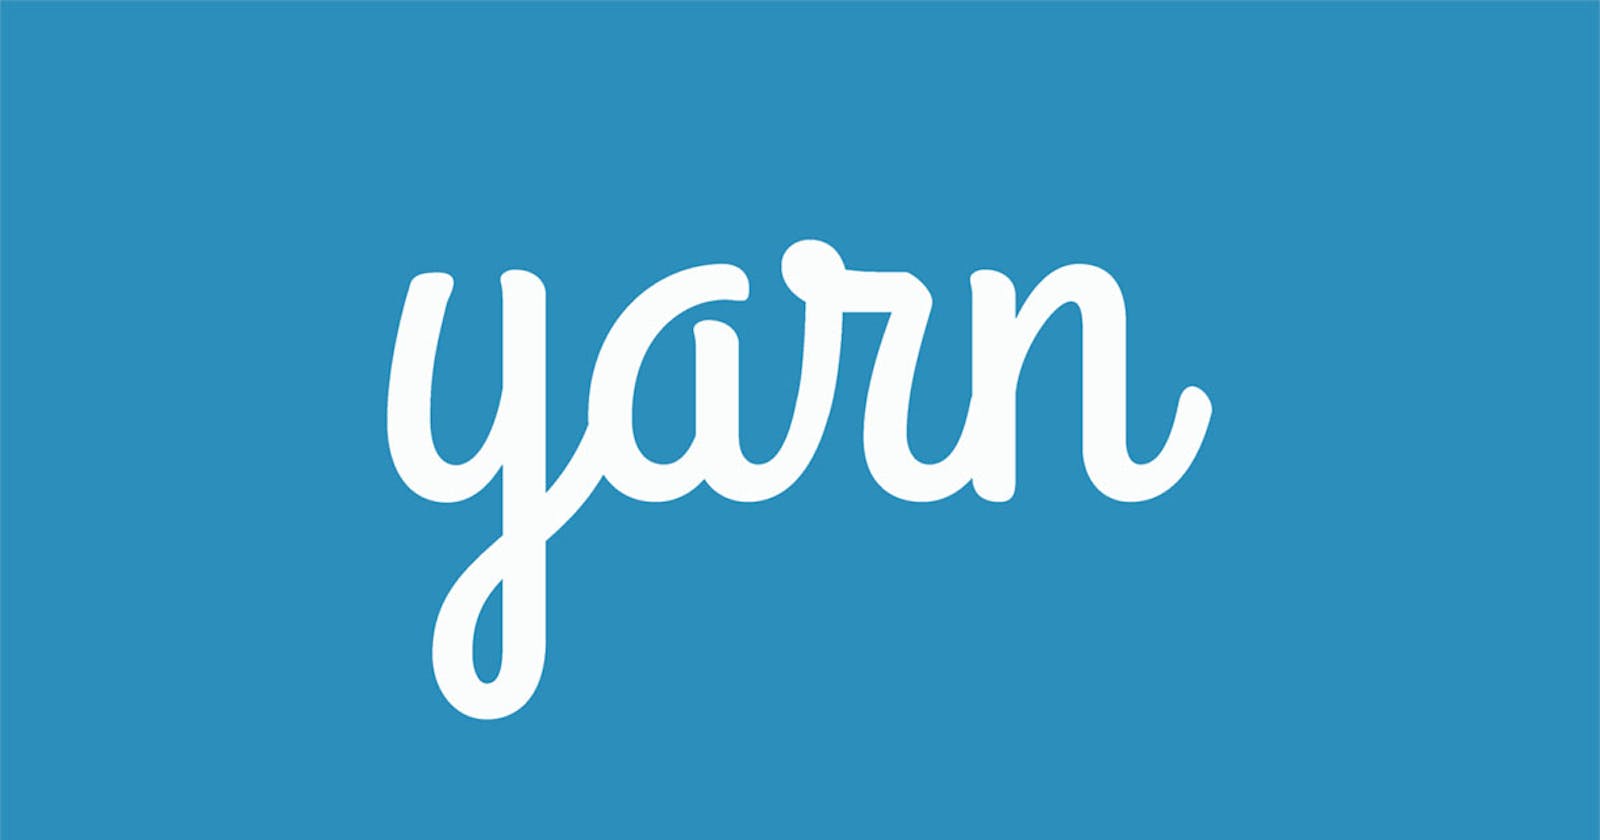 Yarn - a fast, dependable, and secure dependency management tool from Facebook Engineering.